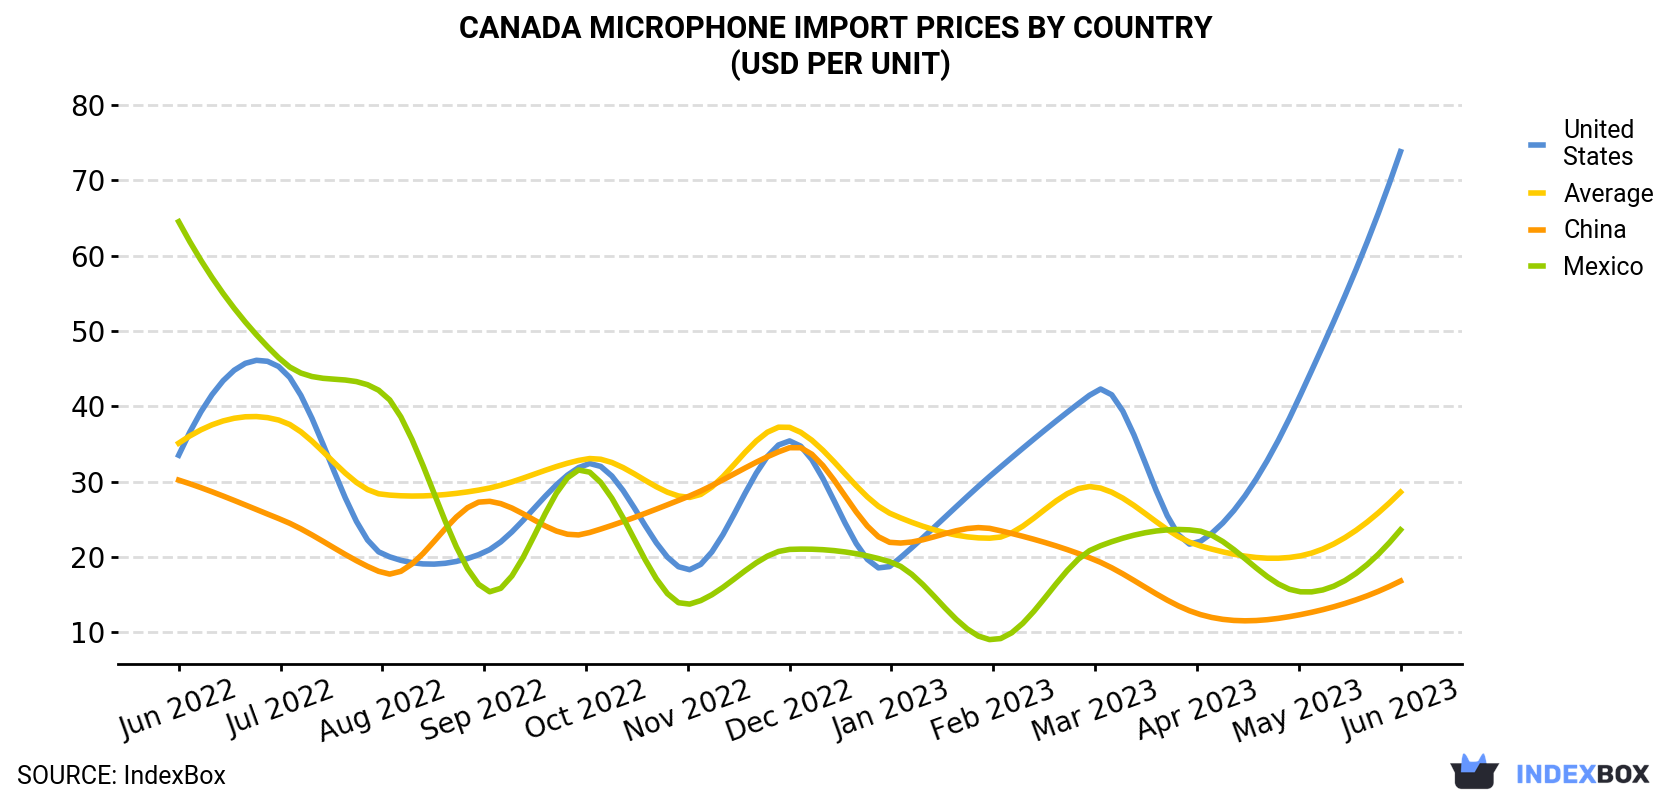 Canada Microphone Import Prices By Country (USD Per Unit)